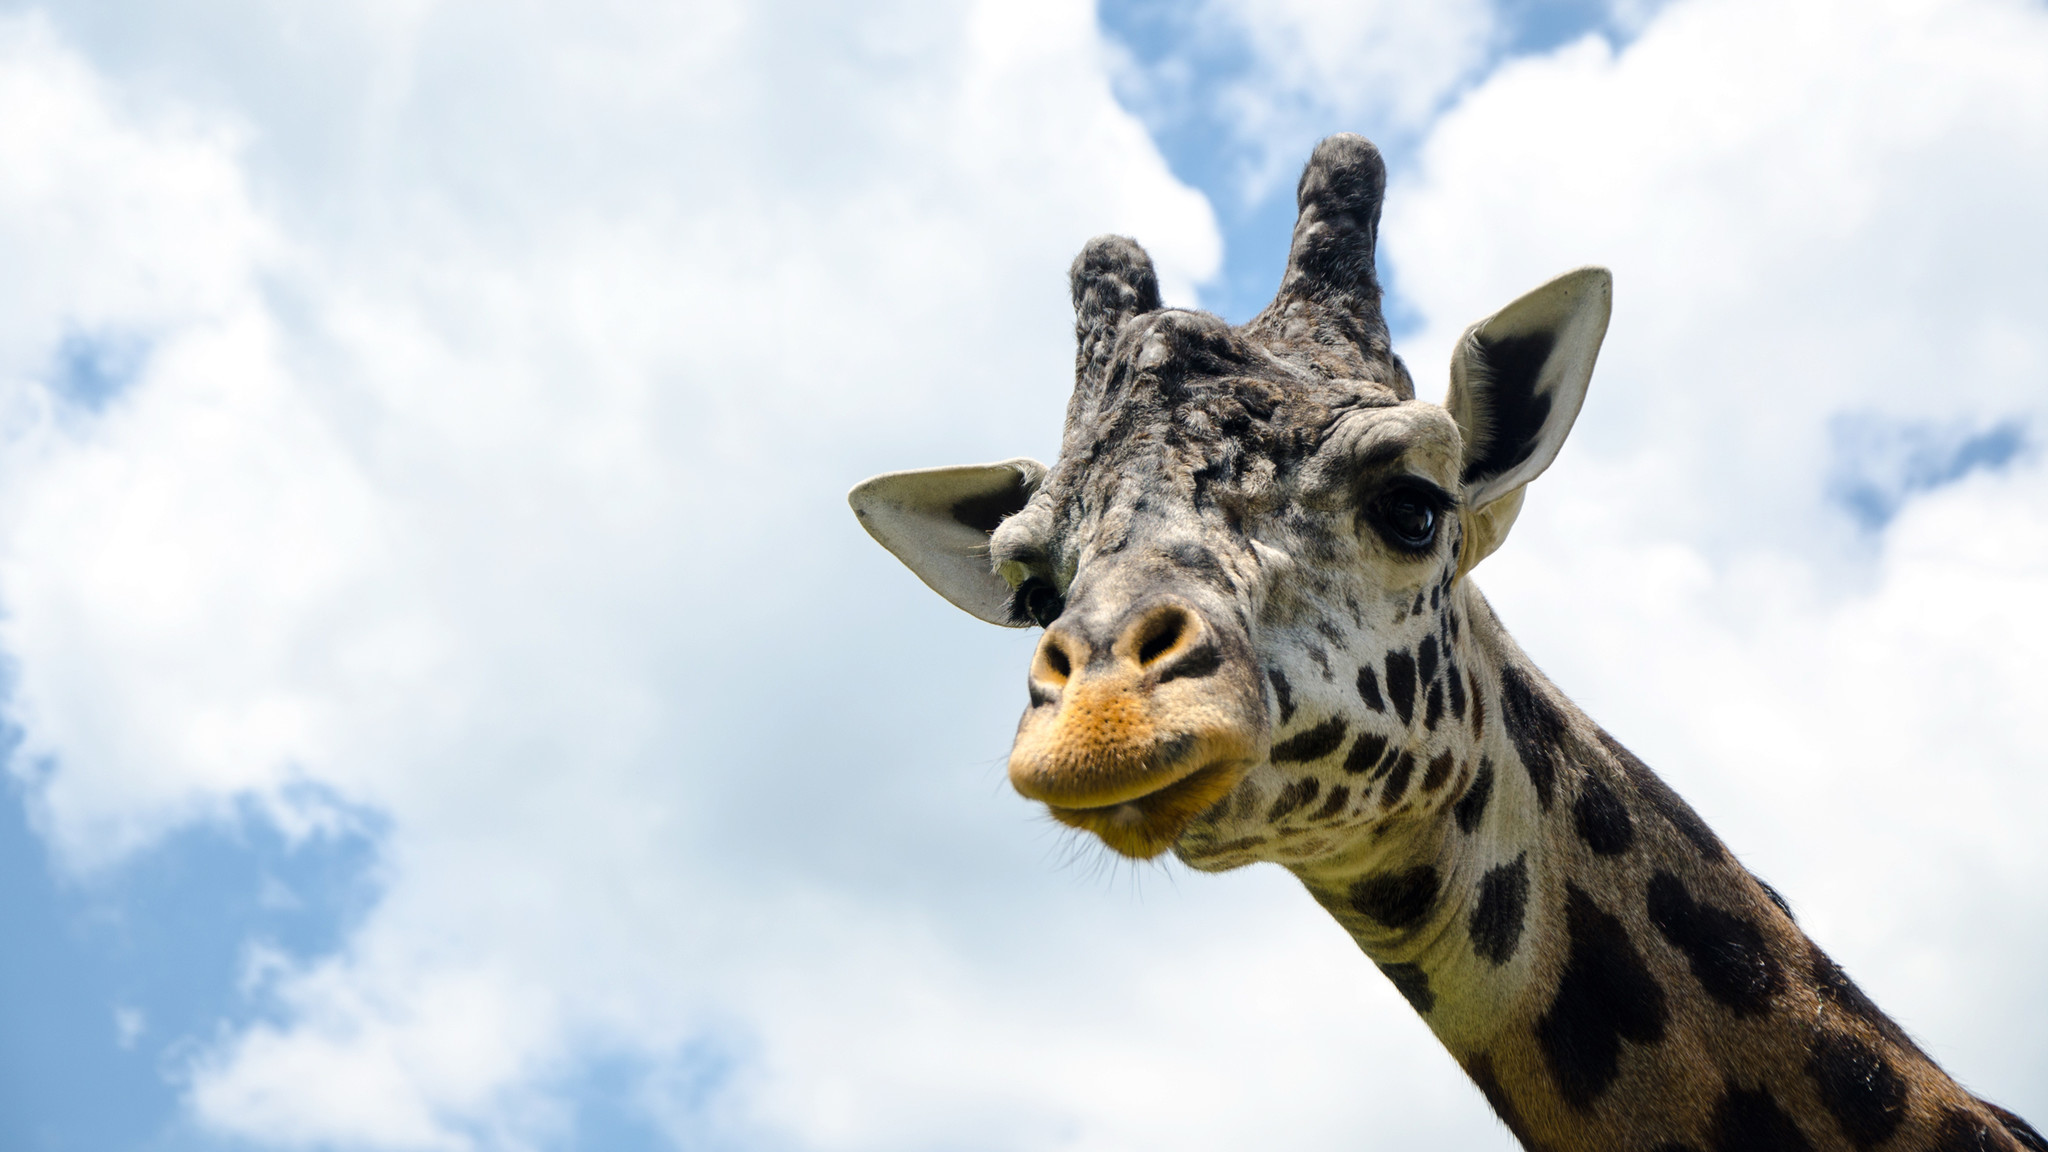 Young giraffe dies at Lehigh Valley Zoo - The Morning Call